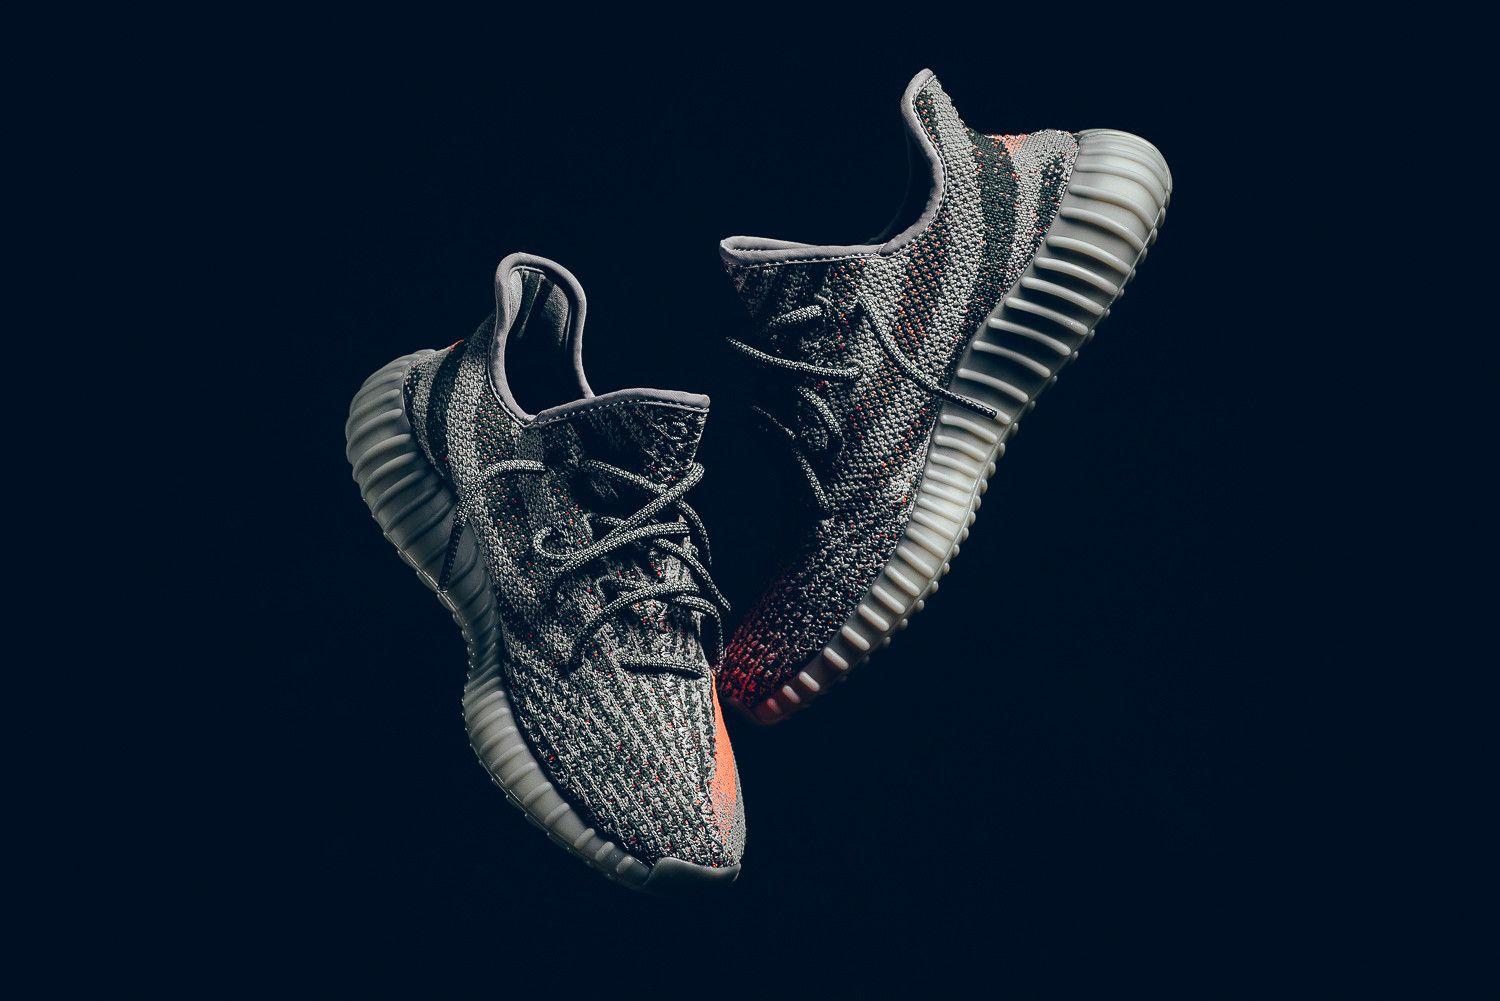 Adidas Yeezy Boost 350 V2 Wallpapers - Wallpaper Cave